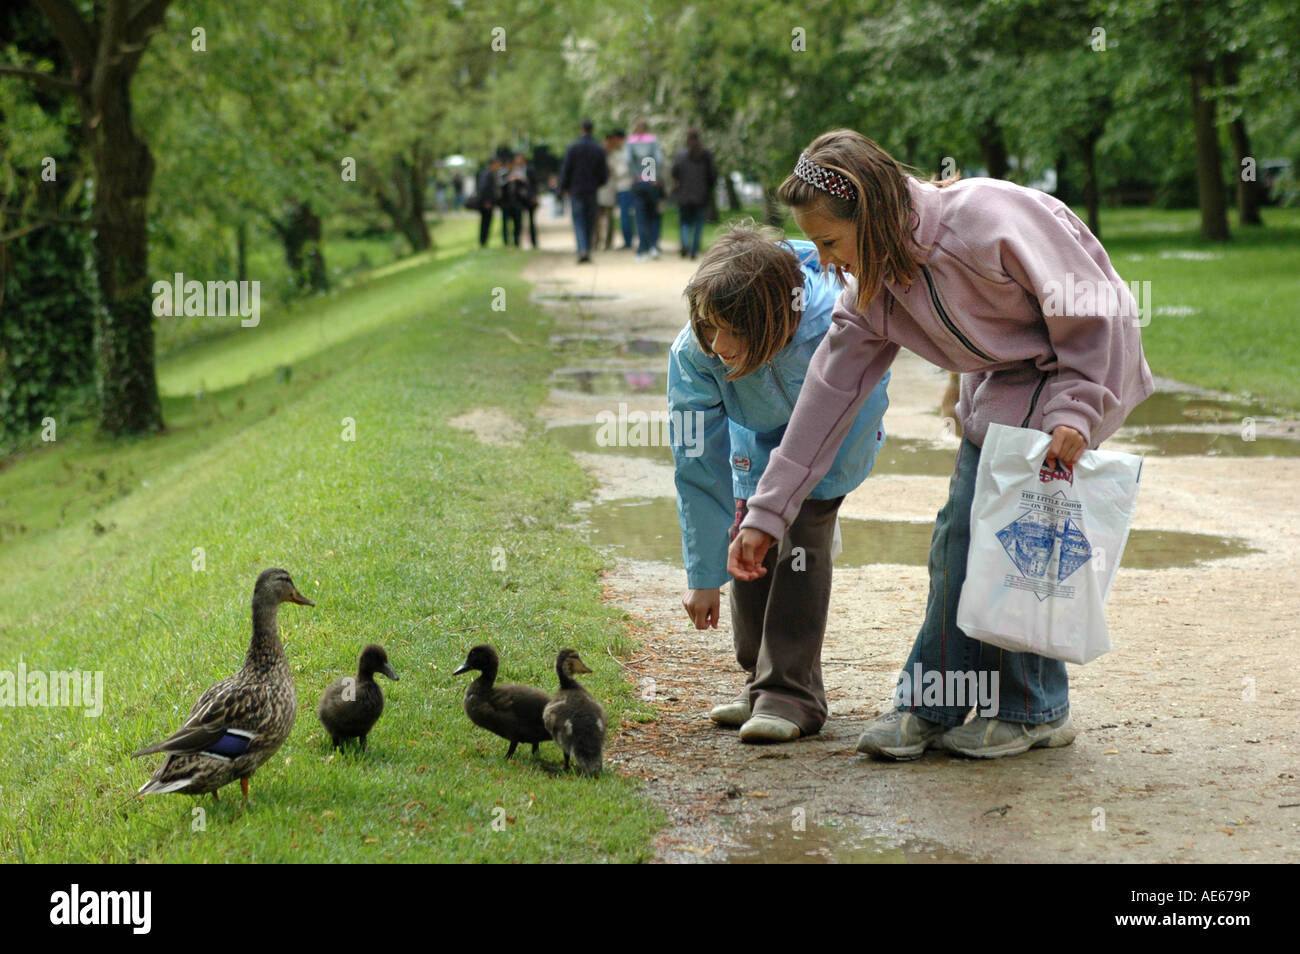 Two girls and four ducks on The Backs, Cambridge England Stock Photo